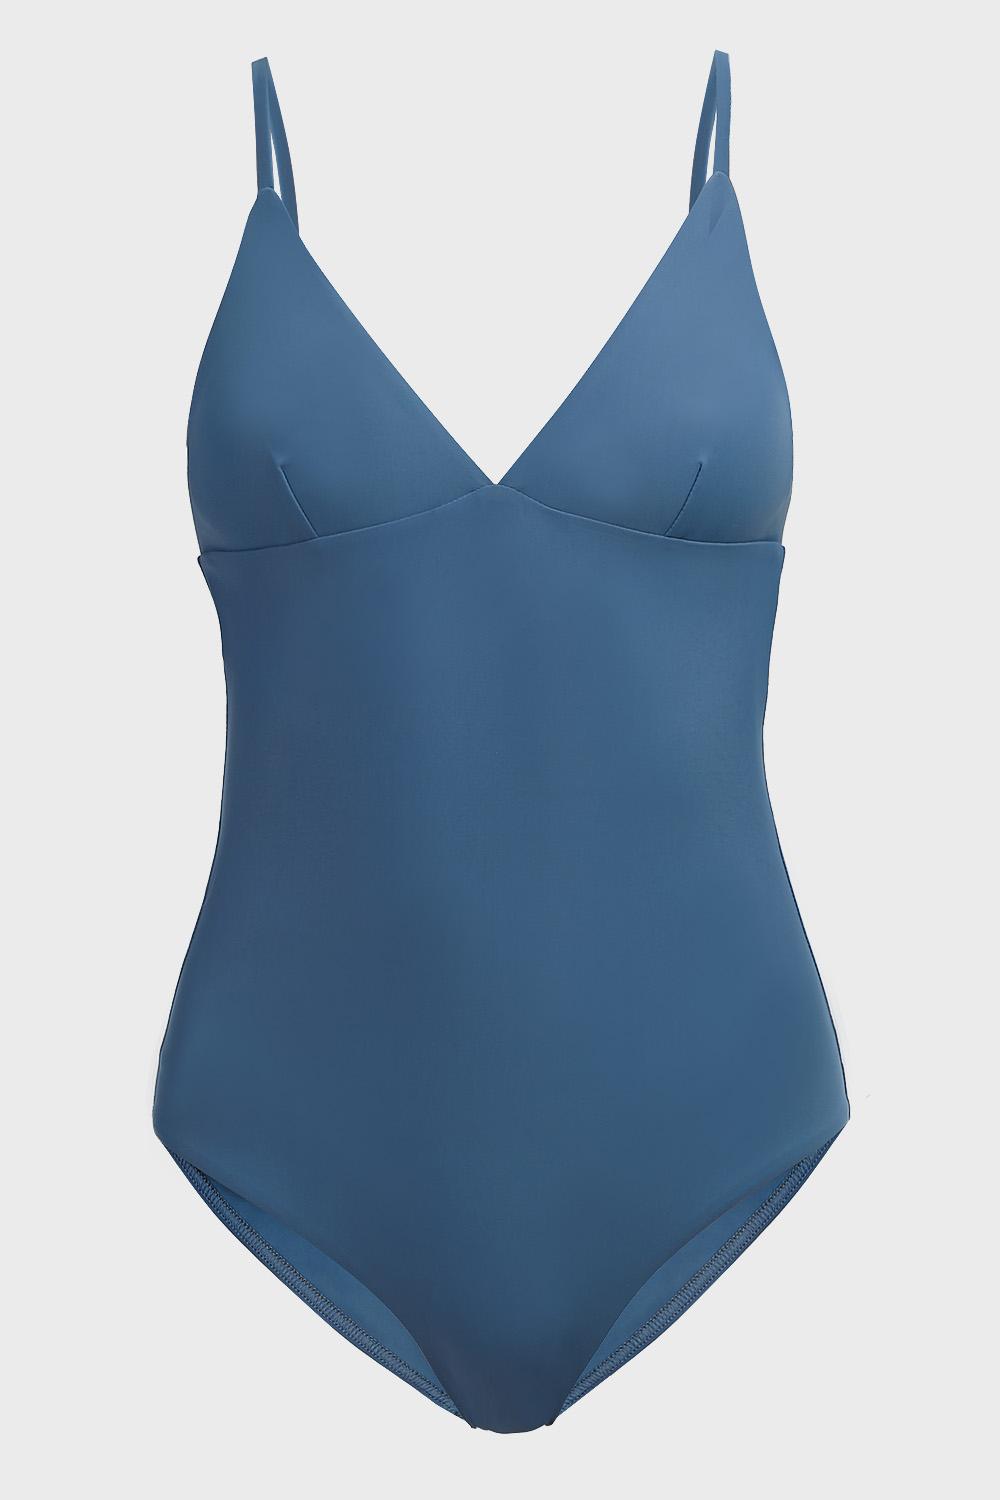 Matteau The Plunge One-piece Swimsuit in Blue - Lyst